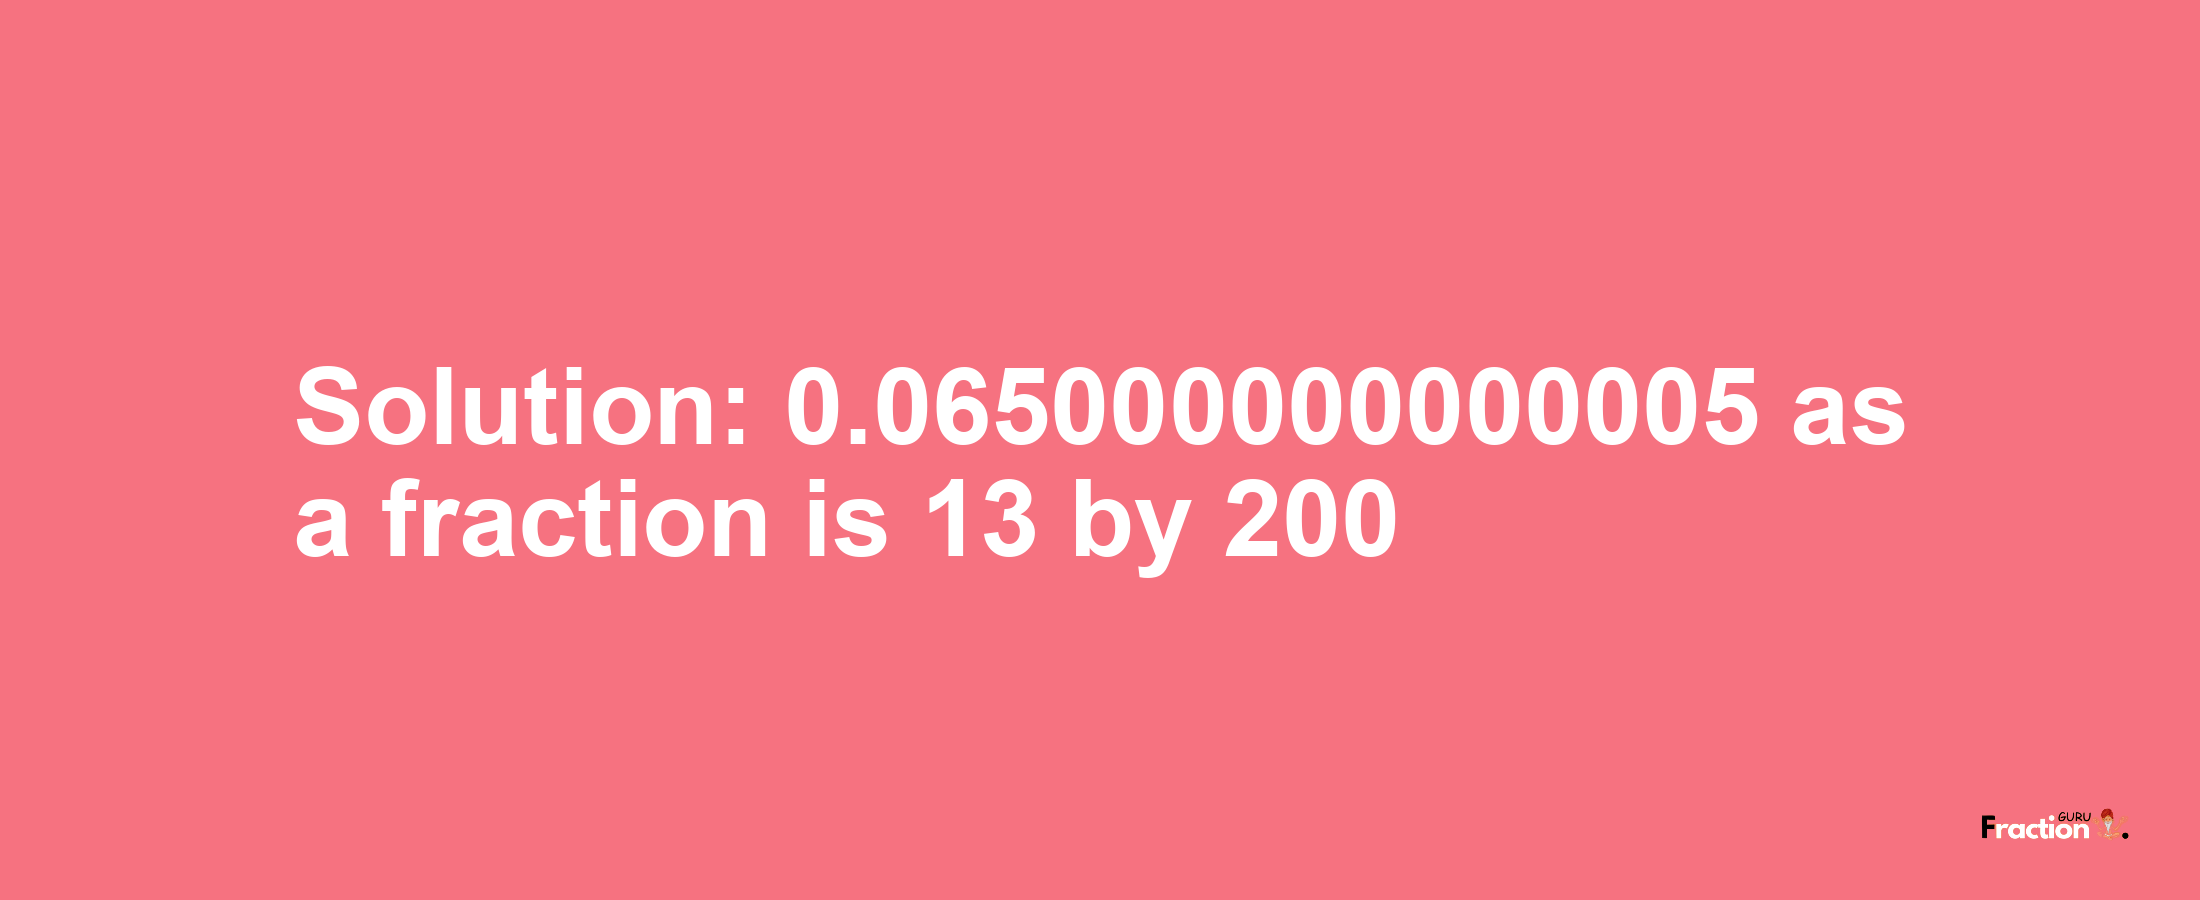 Solution:0.065000000000005 as a fraction is 13/200